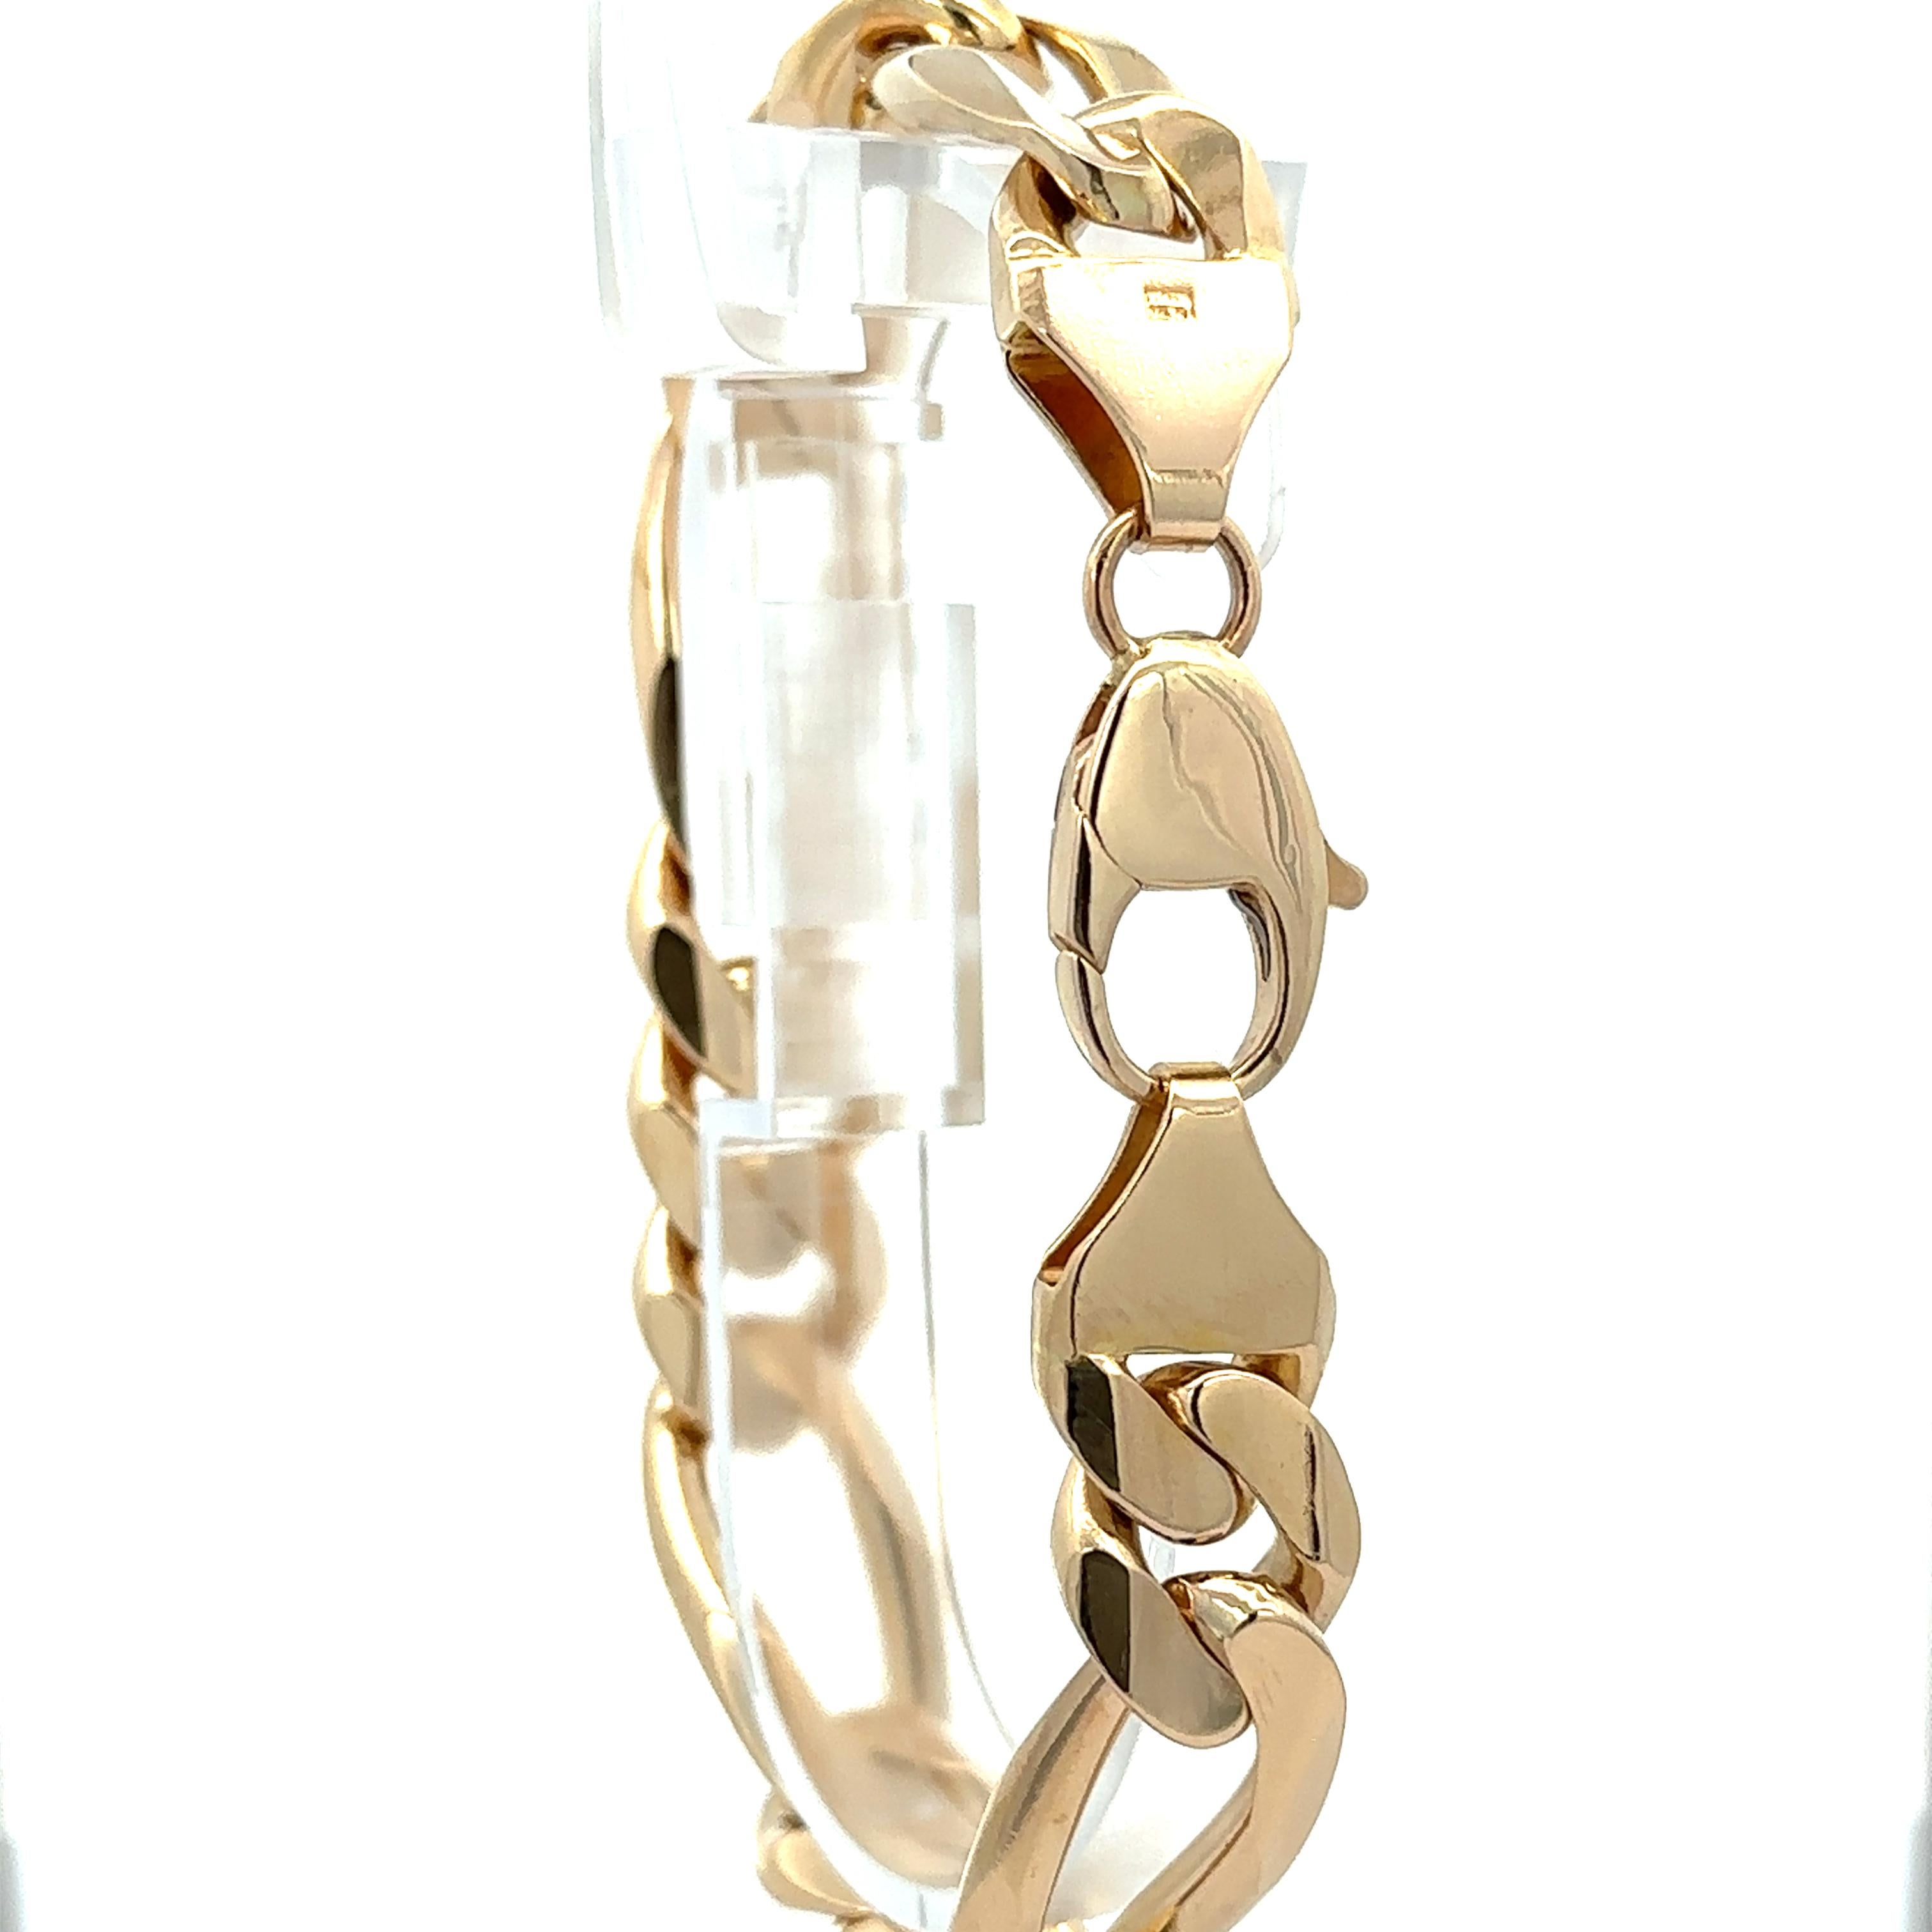 Material: Solid 14k Yellow Gold
Weight: 79.87 Grams
Type: Figaro Link
Length: Will Comfortably Fit up to a 8.5 Inch Wrist
Clasp: Large Lobster Claw Clasp
Width: 13.6mm
Thickness: 4.1mm rise off the wrist
Condition: Excellent condition!
Stock Number: